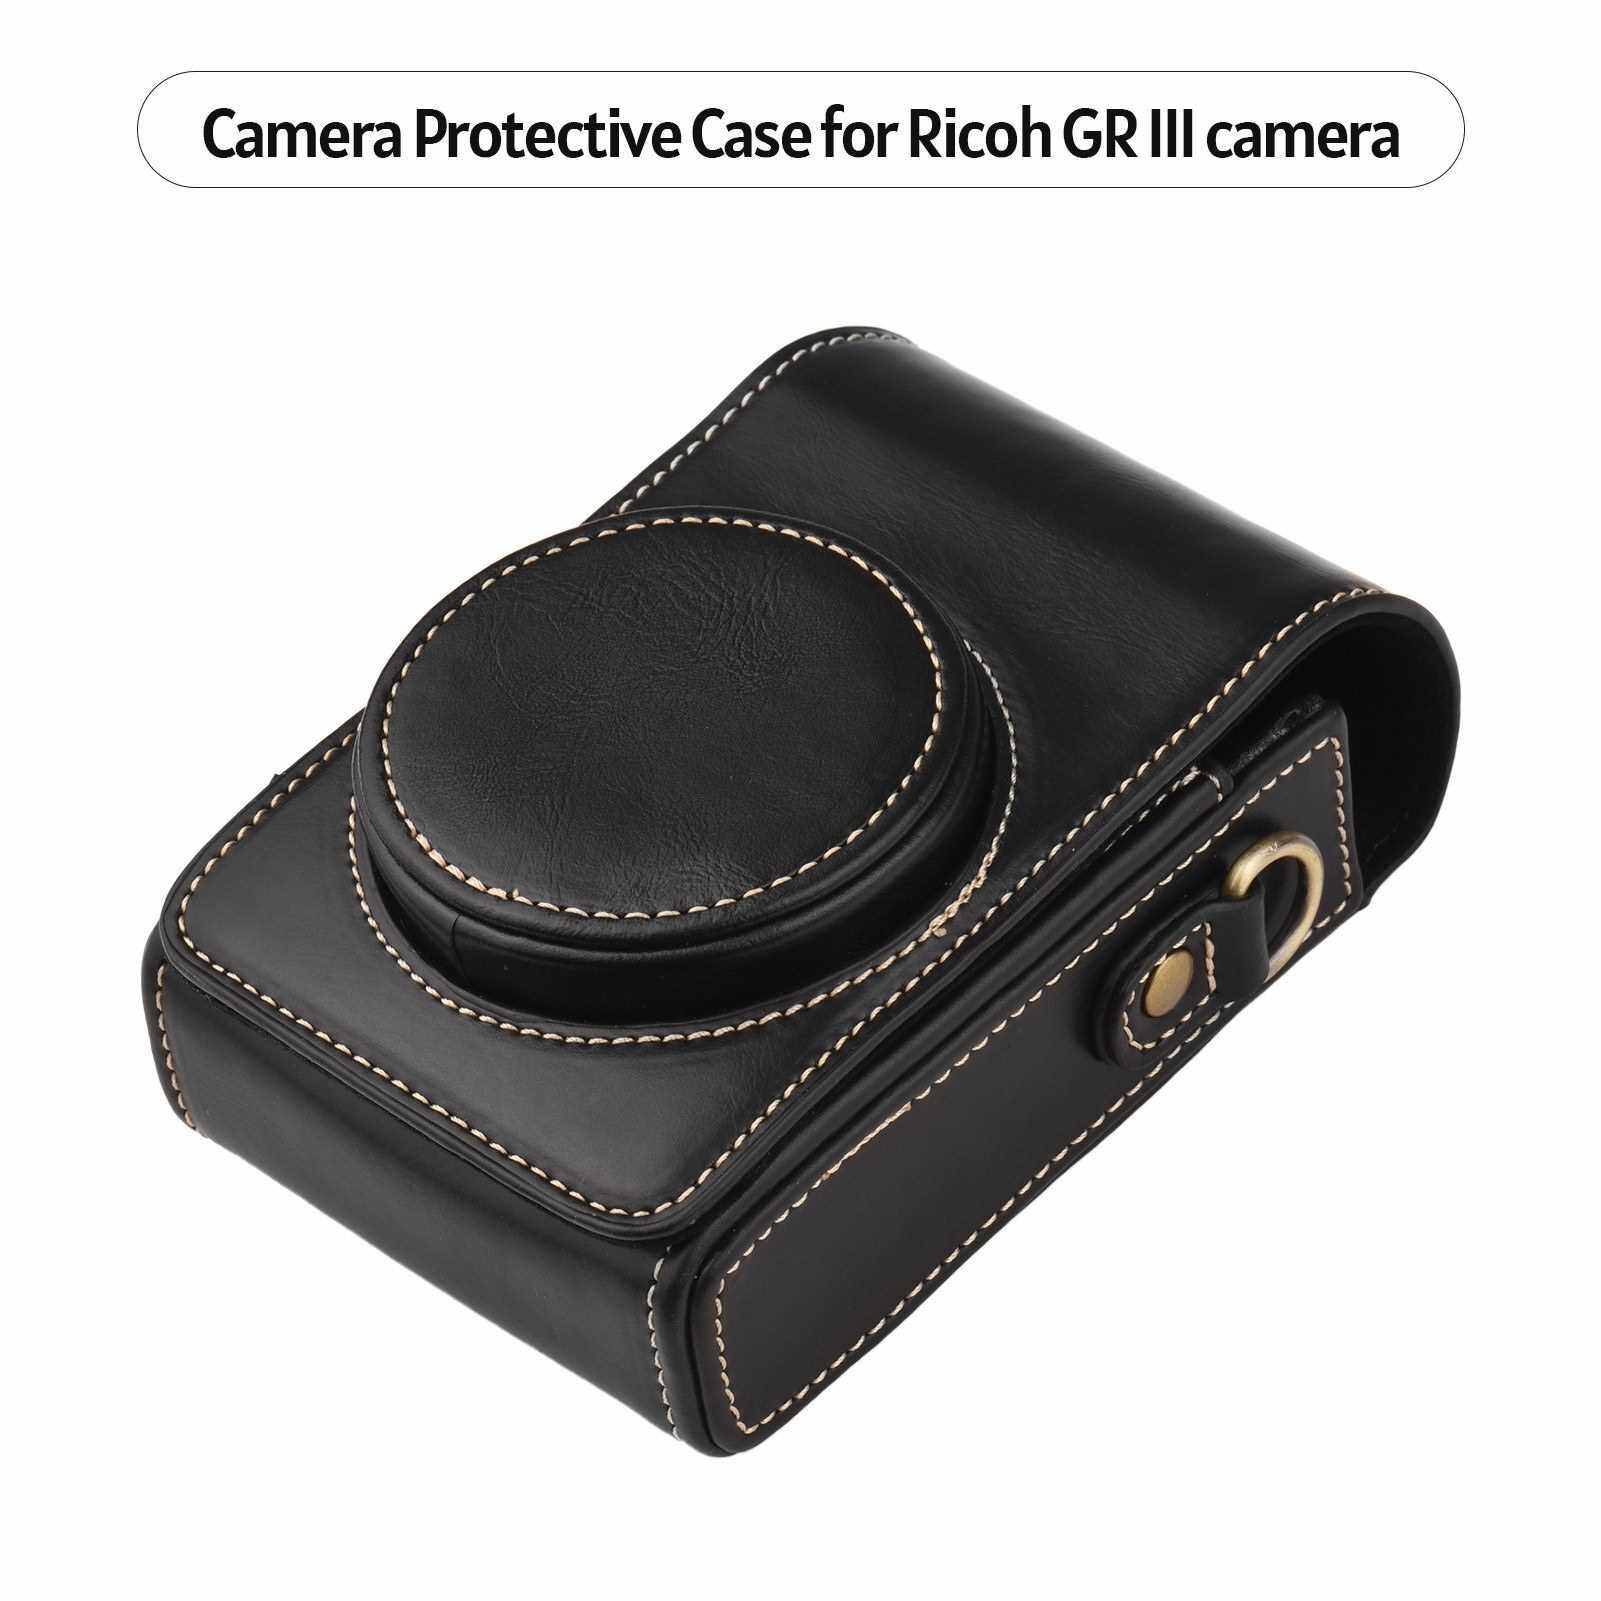 Portable Camera Case Carry Bag Synthetic Leather with Shoulder Strap Replacement for Sony RX100/ RX100 II/ RX100 III/ RX100 IV/ RX100V/ RX100 VI/ RX100 VII/ ZV1 for Ricoh GR2/ GR3 (Black)